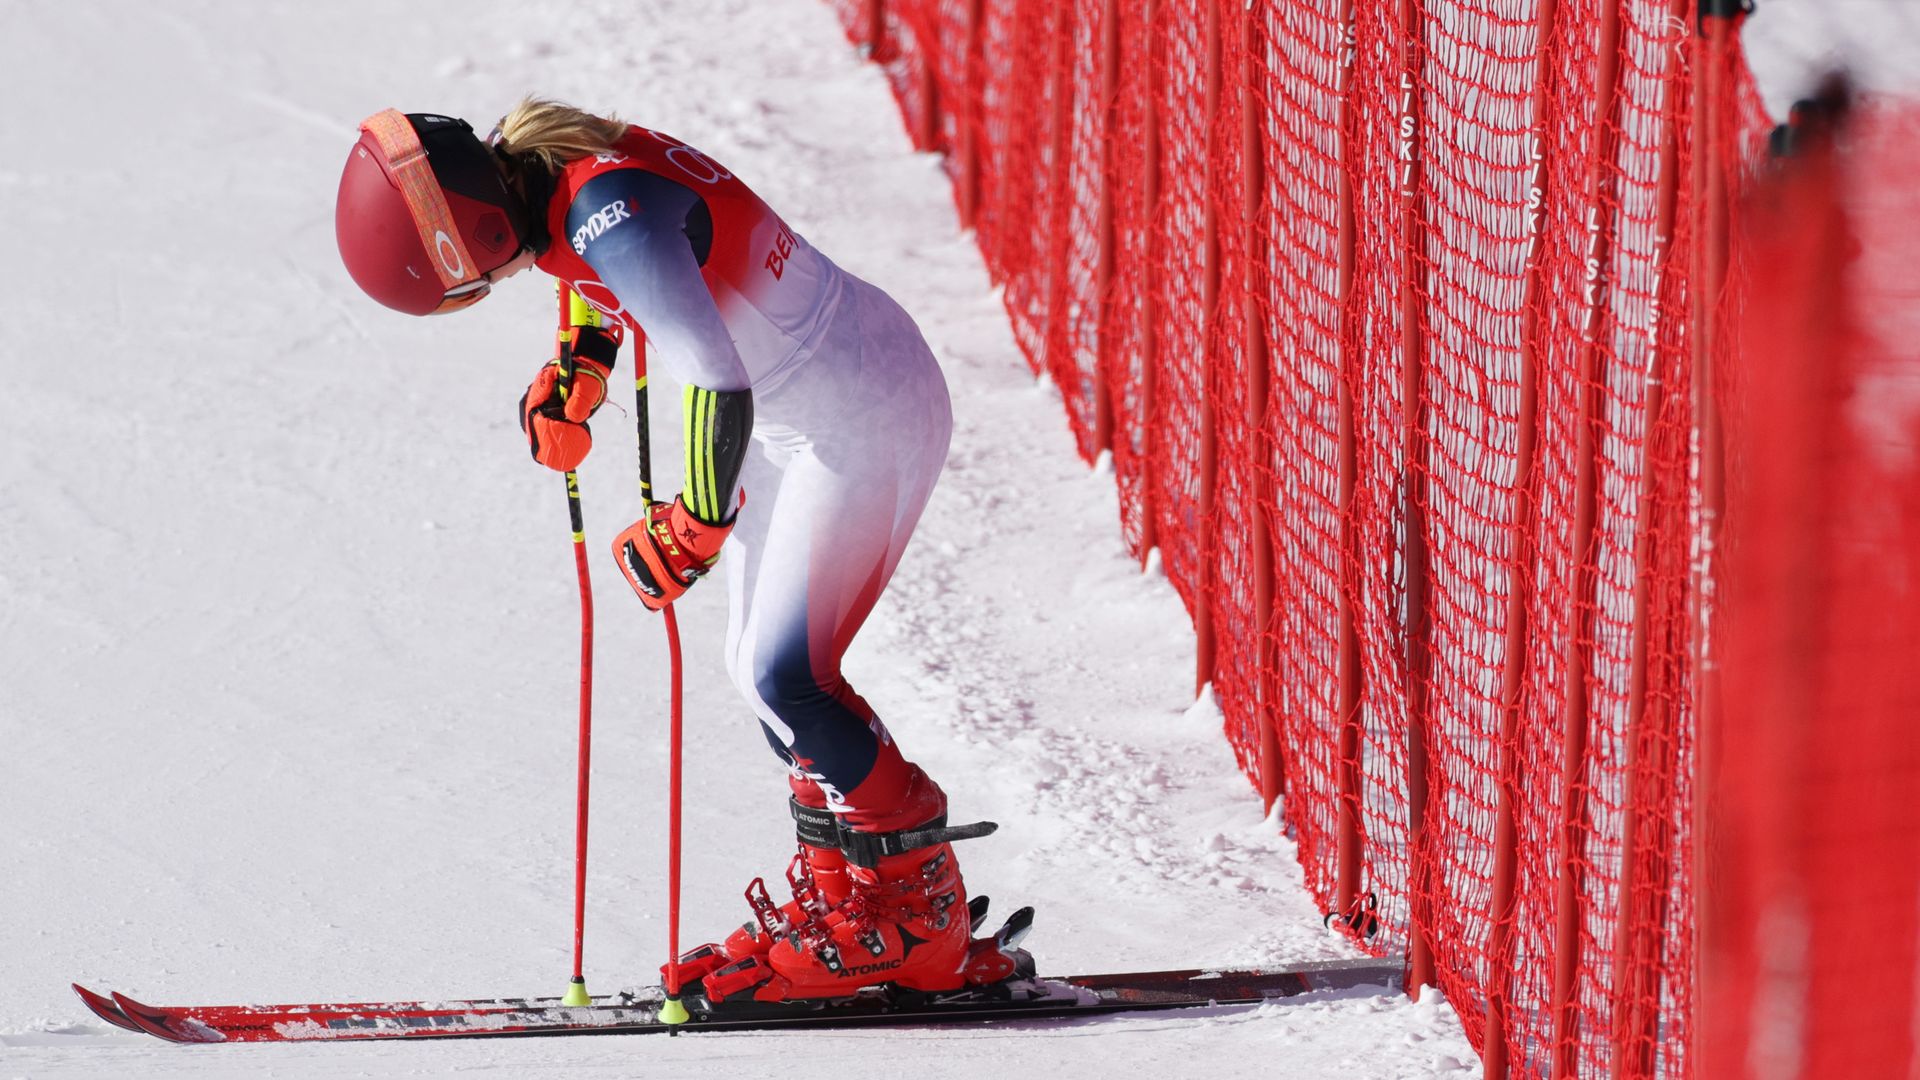 Mikaela Shiffrin of Team United States reacts after not finishing her run during the women's giant slalom. Photo: Adam Pretty/Getty Images